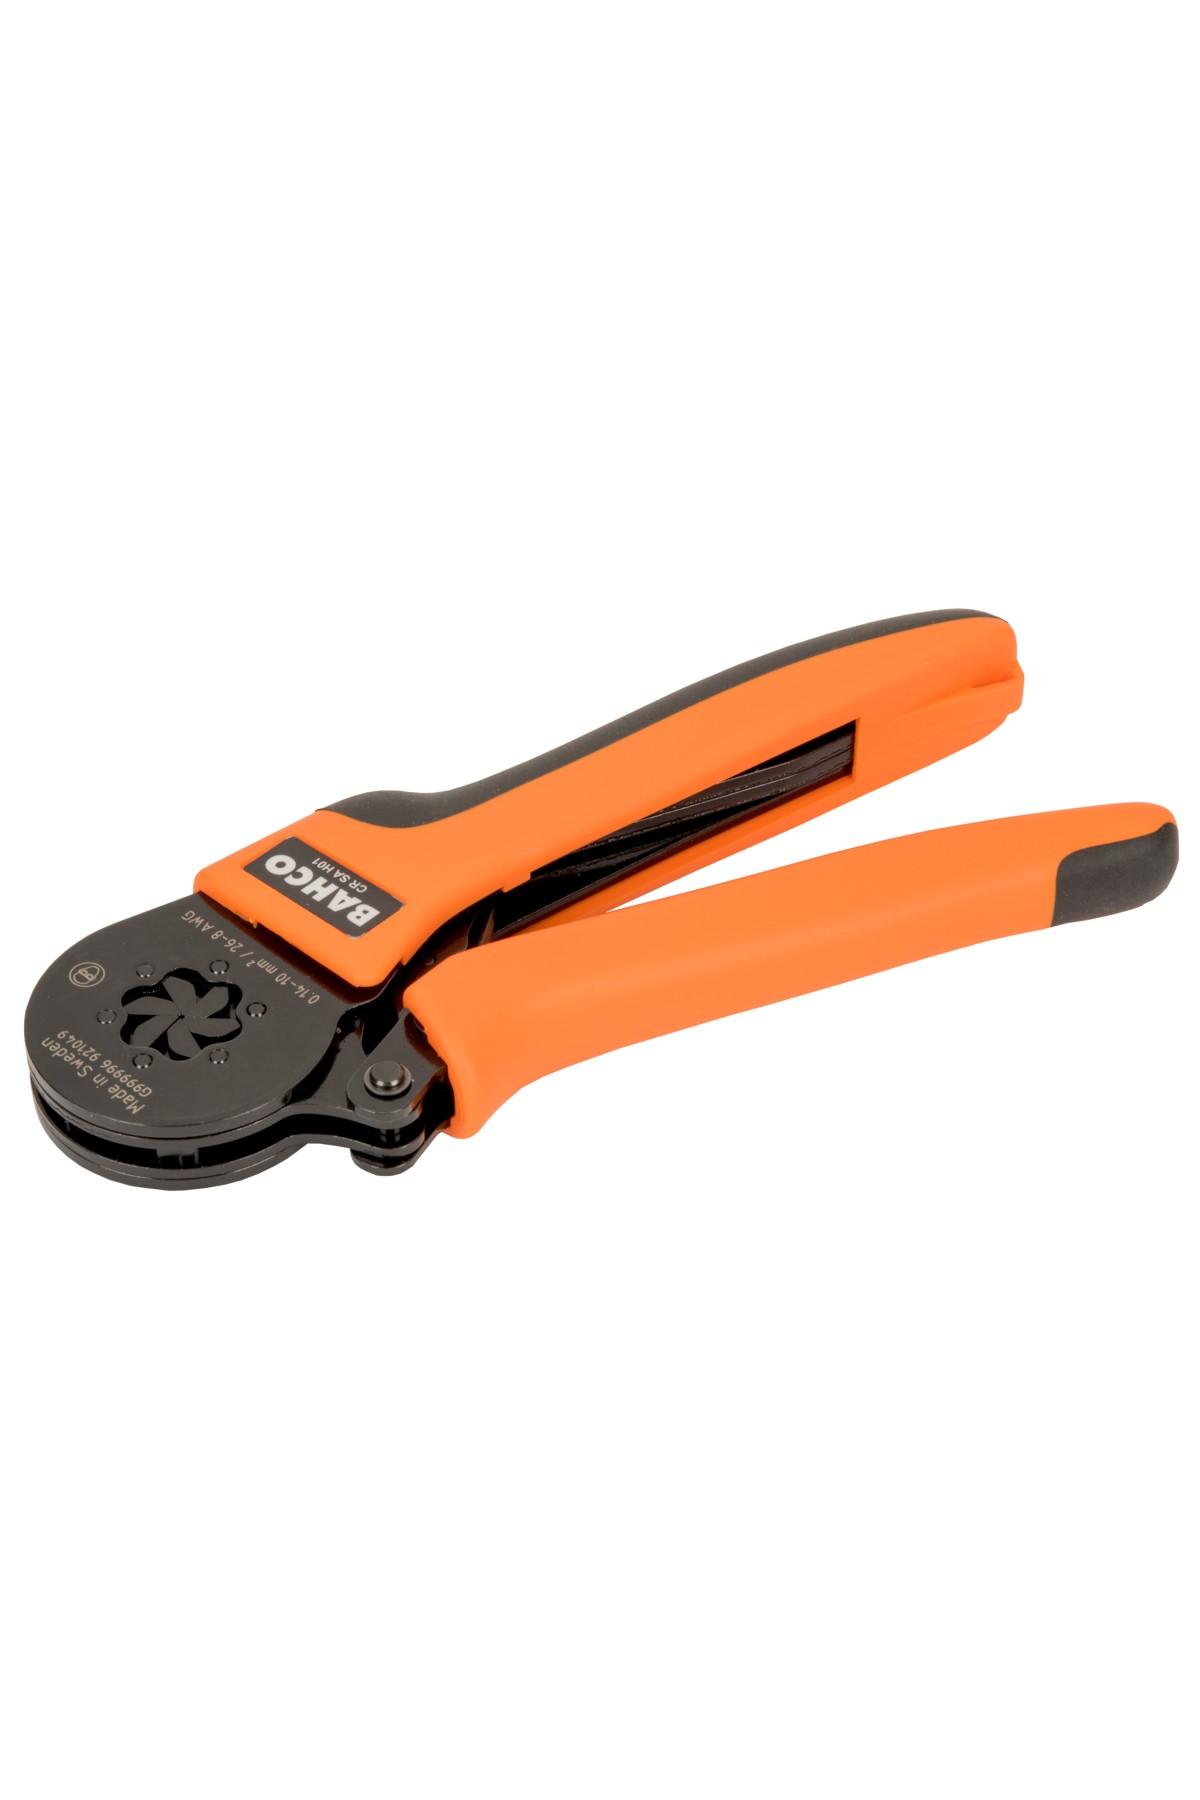 Crimping pliers with self-adjusting jaws - Hexagonal profile